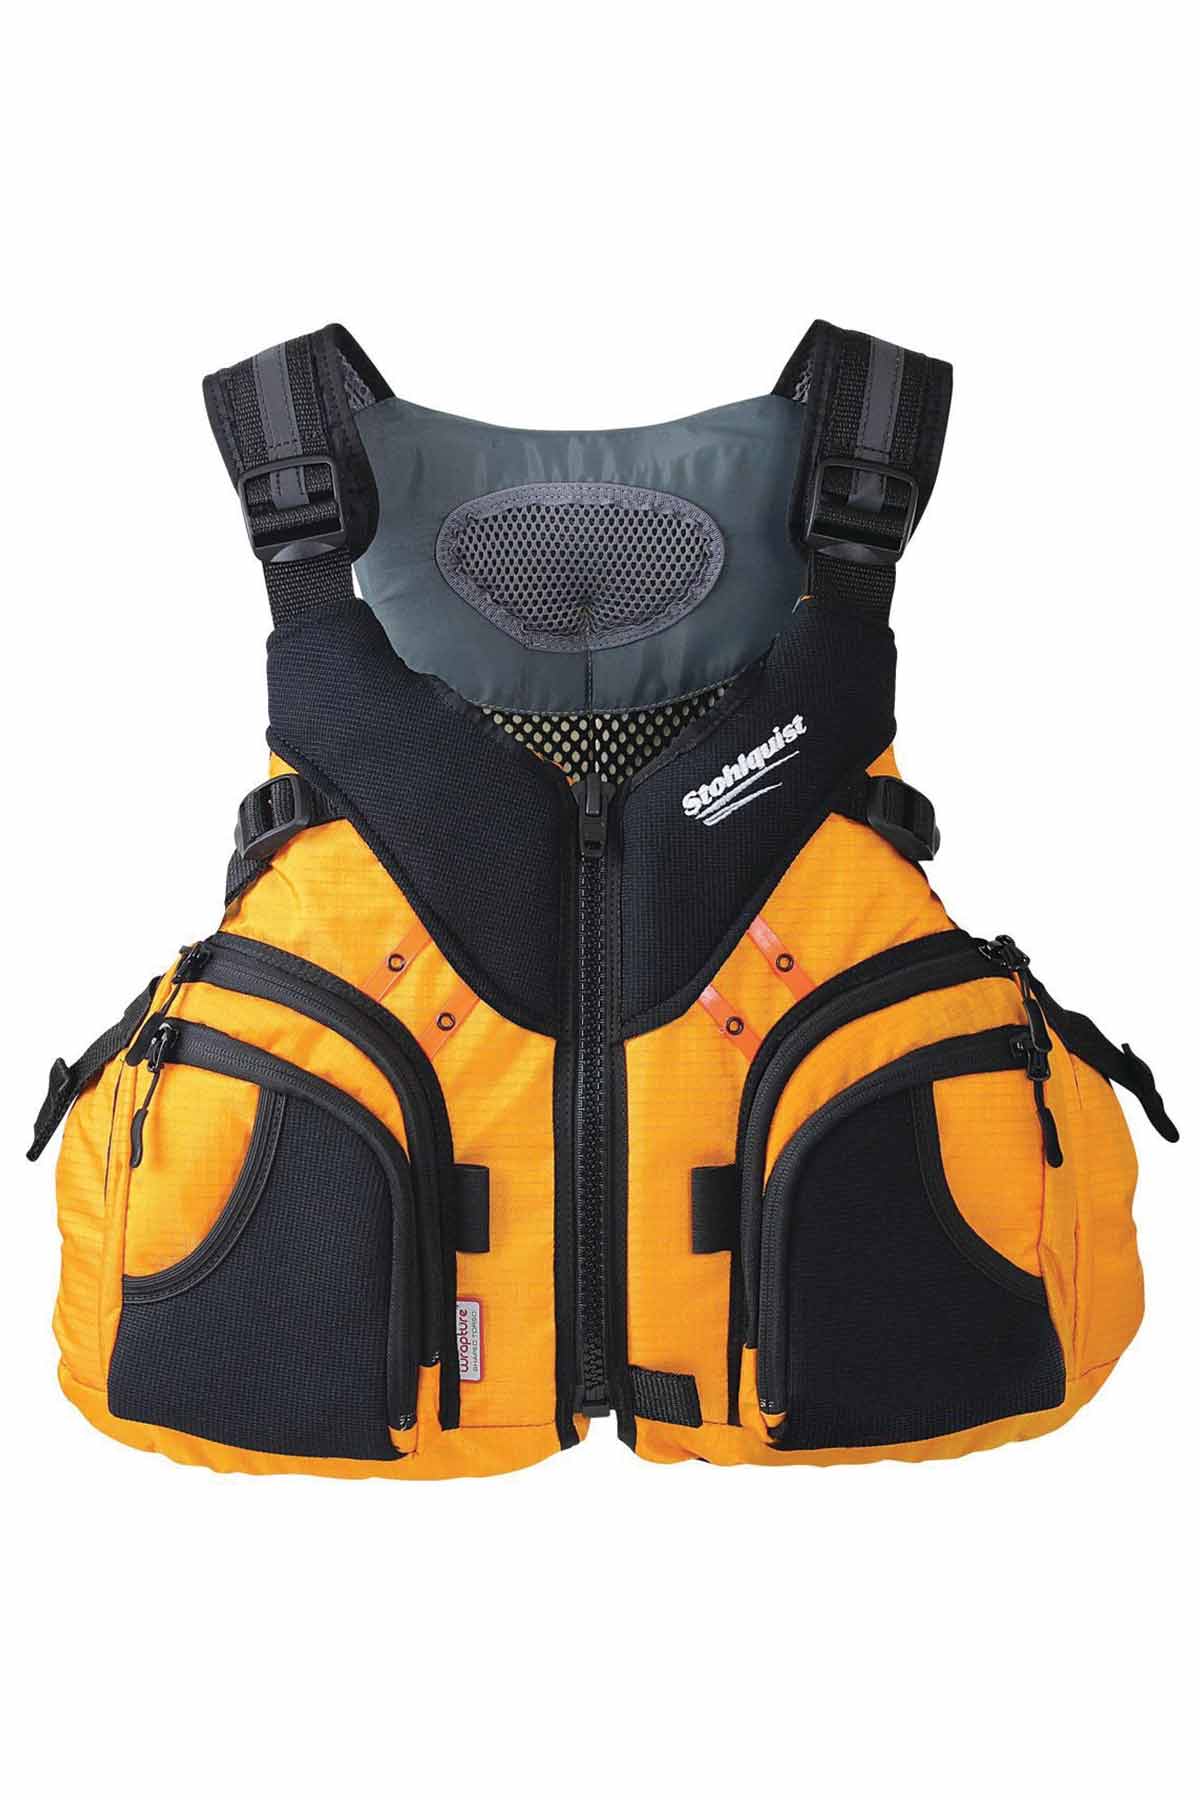 Stohlquist Keeper Mango PFD Front View